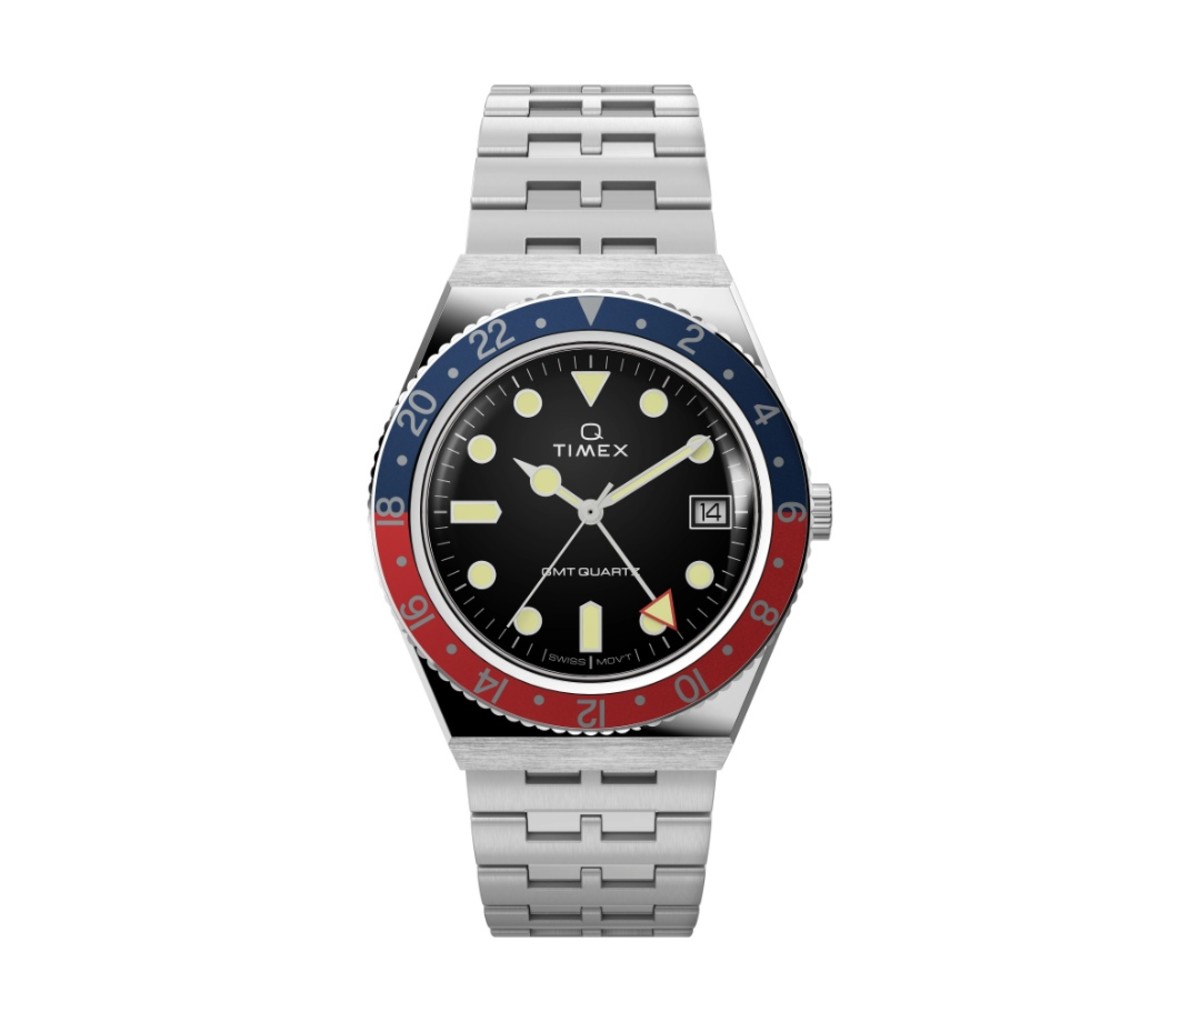 Q Timex GMT Watch with a red and blue bezel on a white background